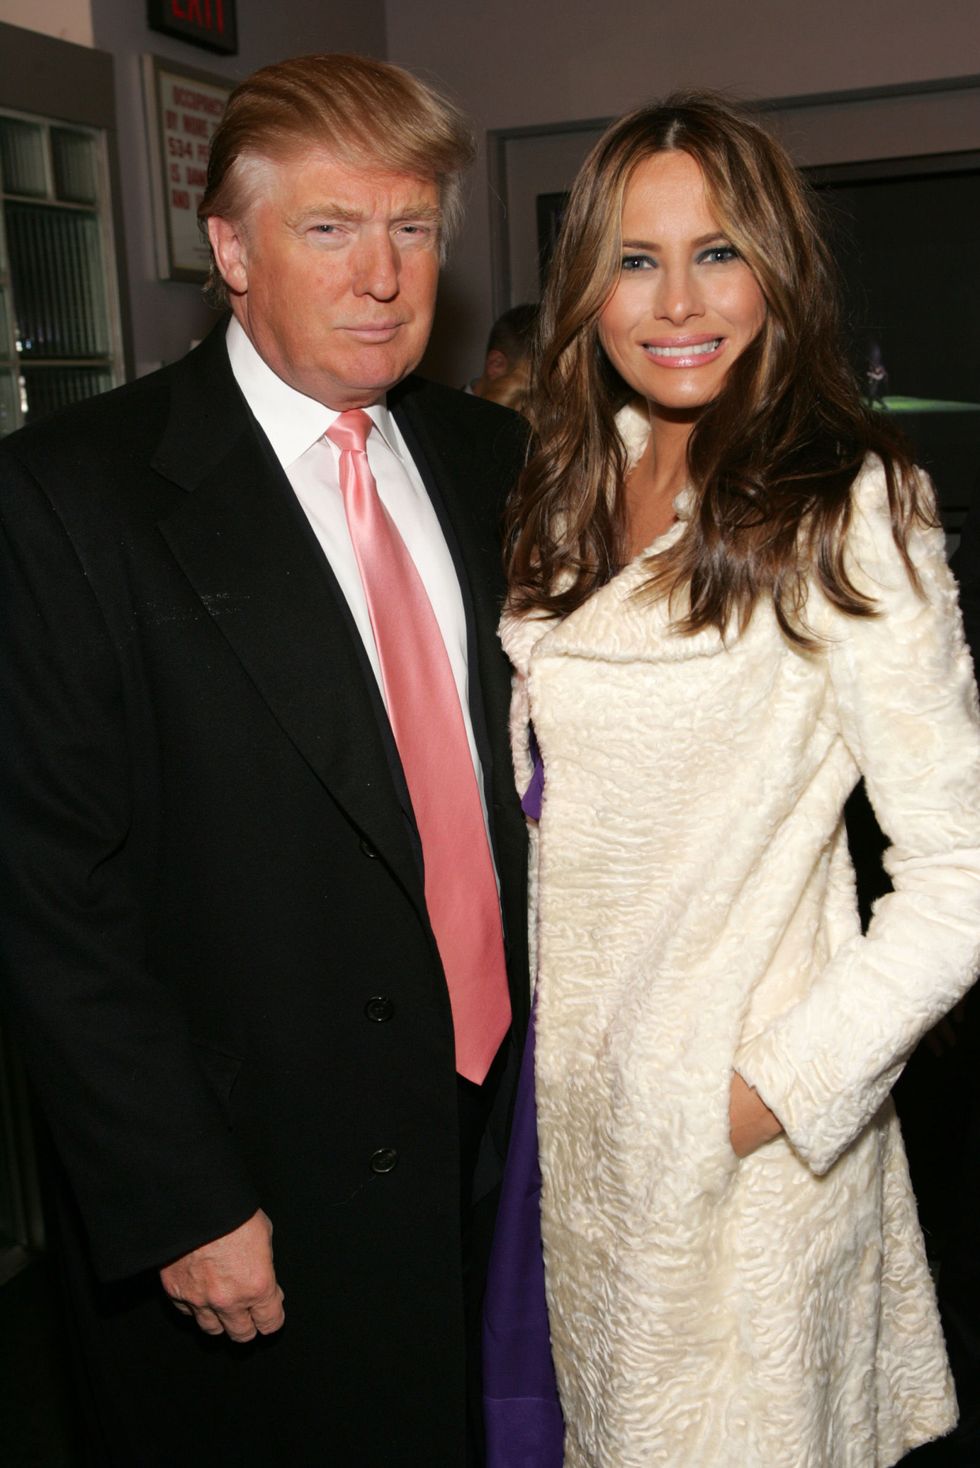 Donald and Melania Trump attend the American Ballet Theatre premiere of 'Cake' at the Joyce Theater on May 1, 2008 in New York City